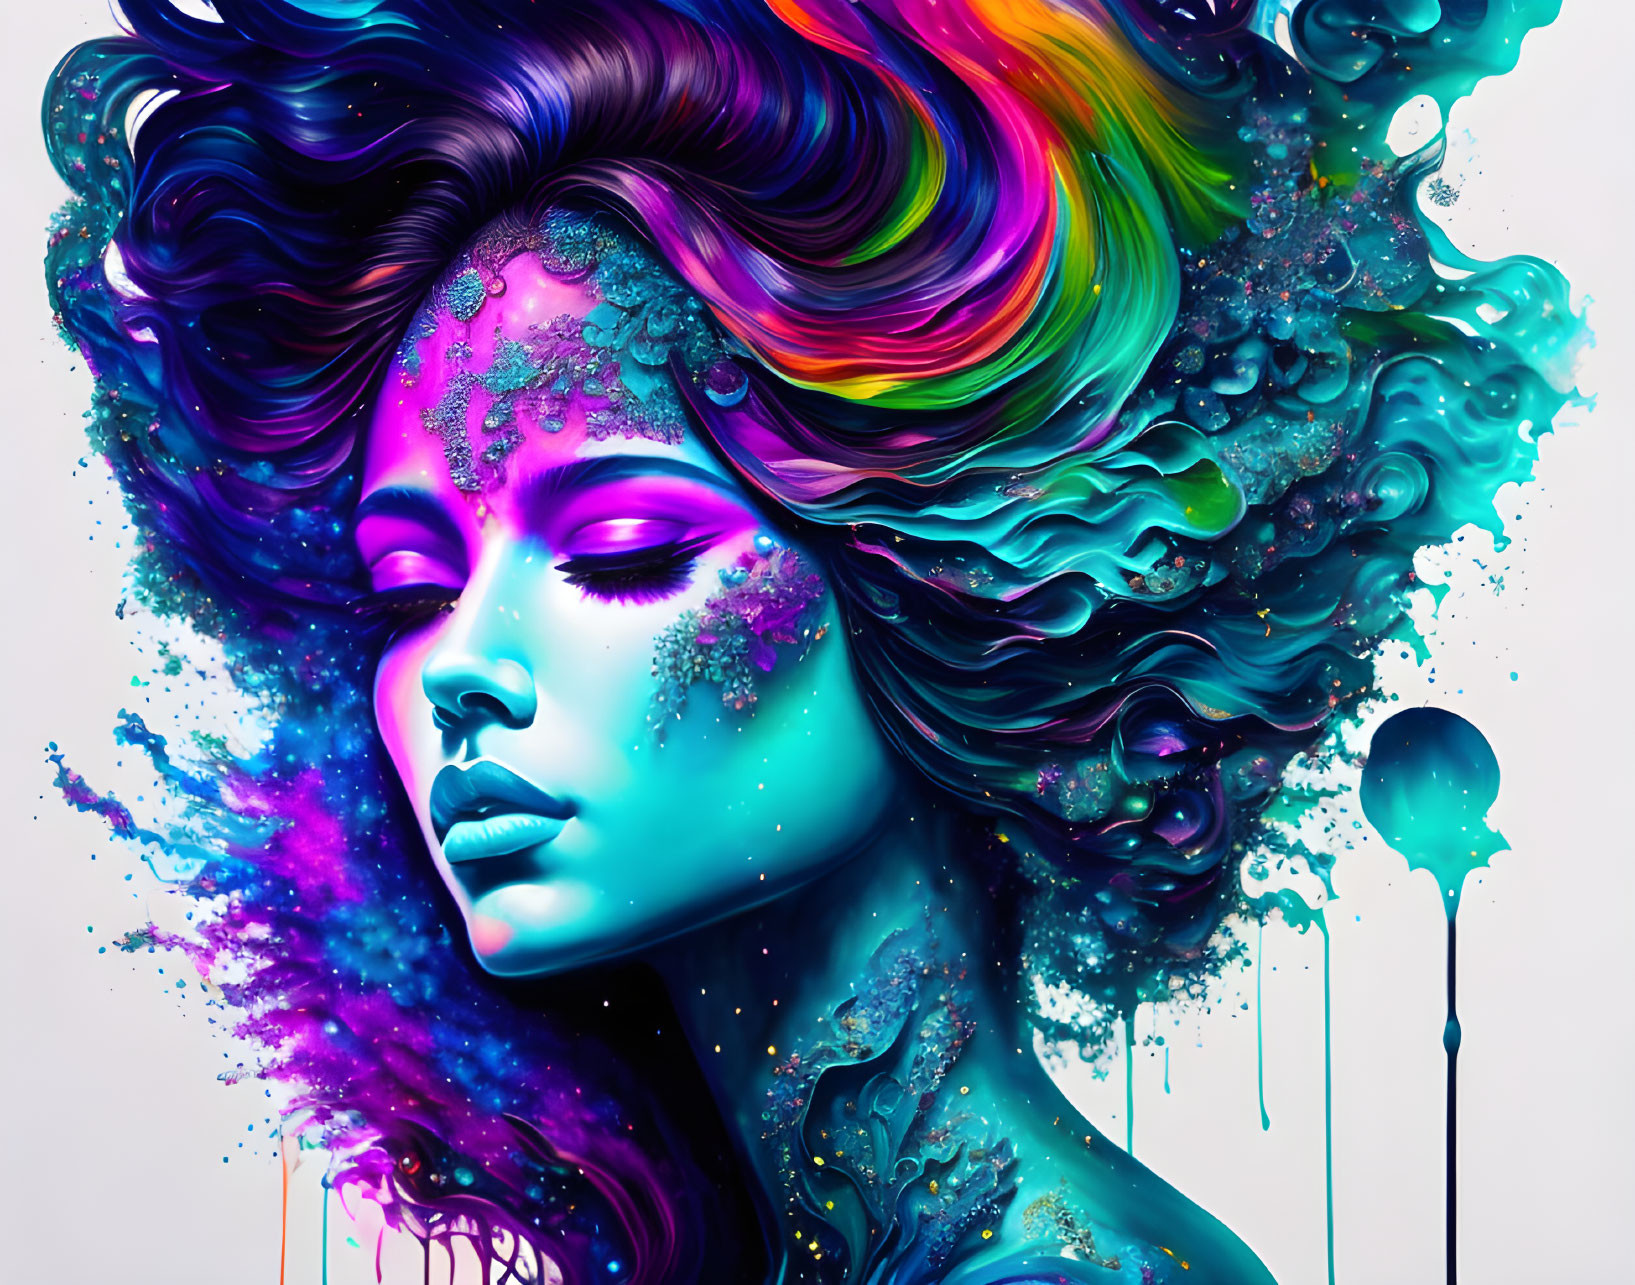 Colorful digital artwork: Woman with flowing, vibrant hair and cosmic paint splatters